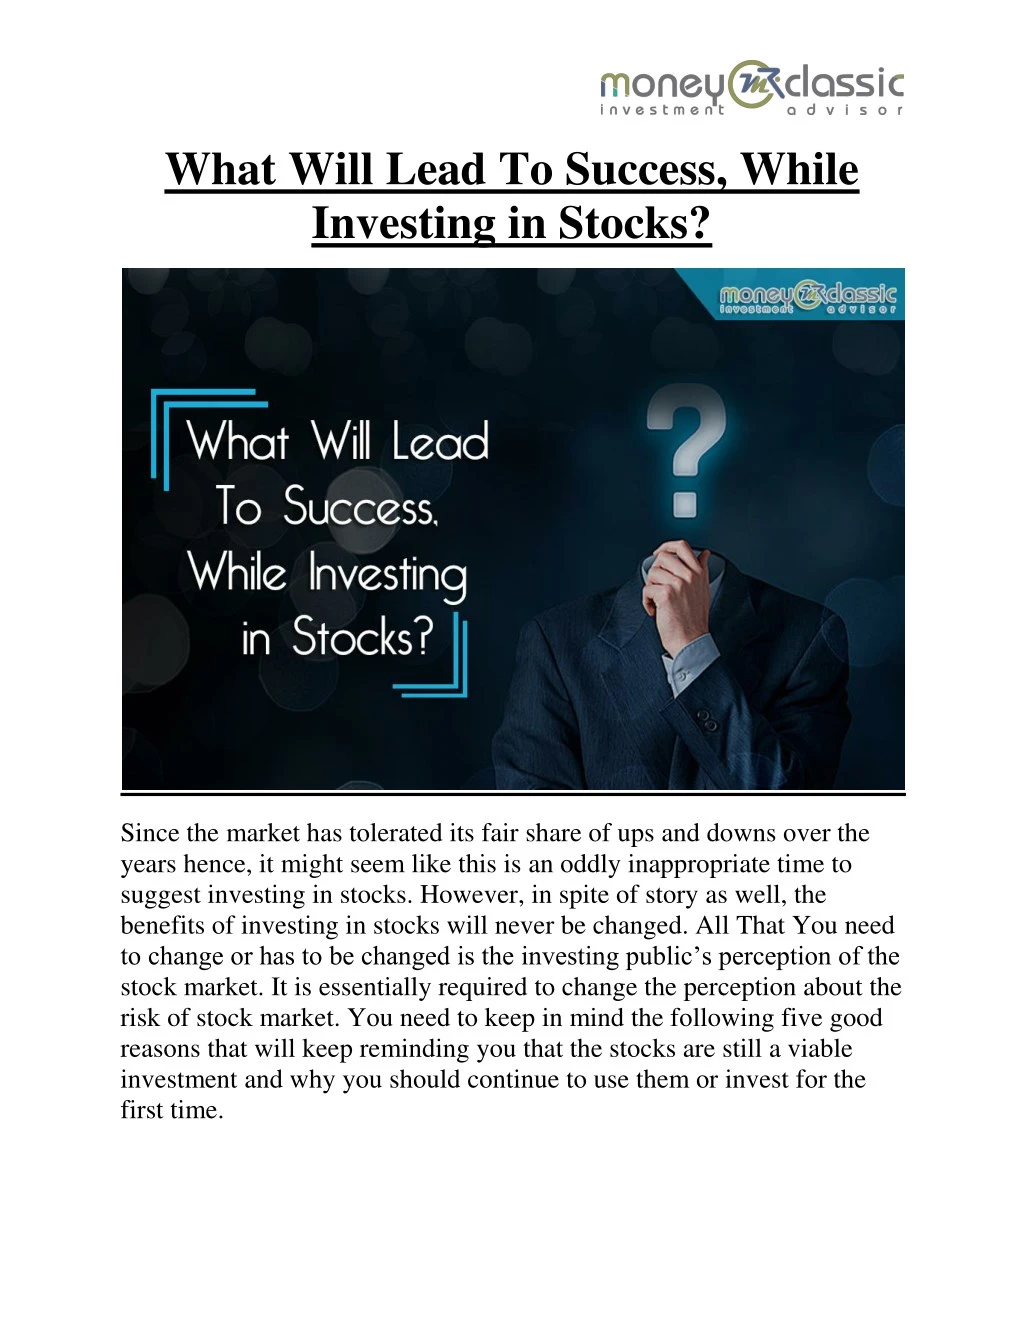 what will lead to success while investing